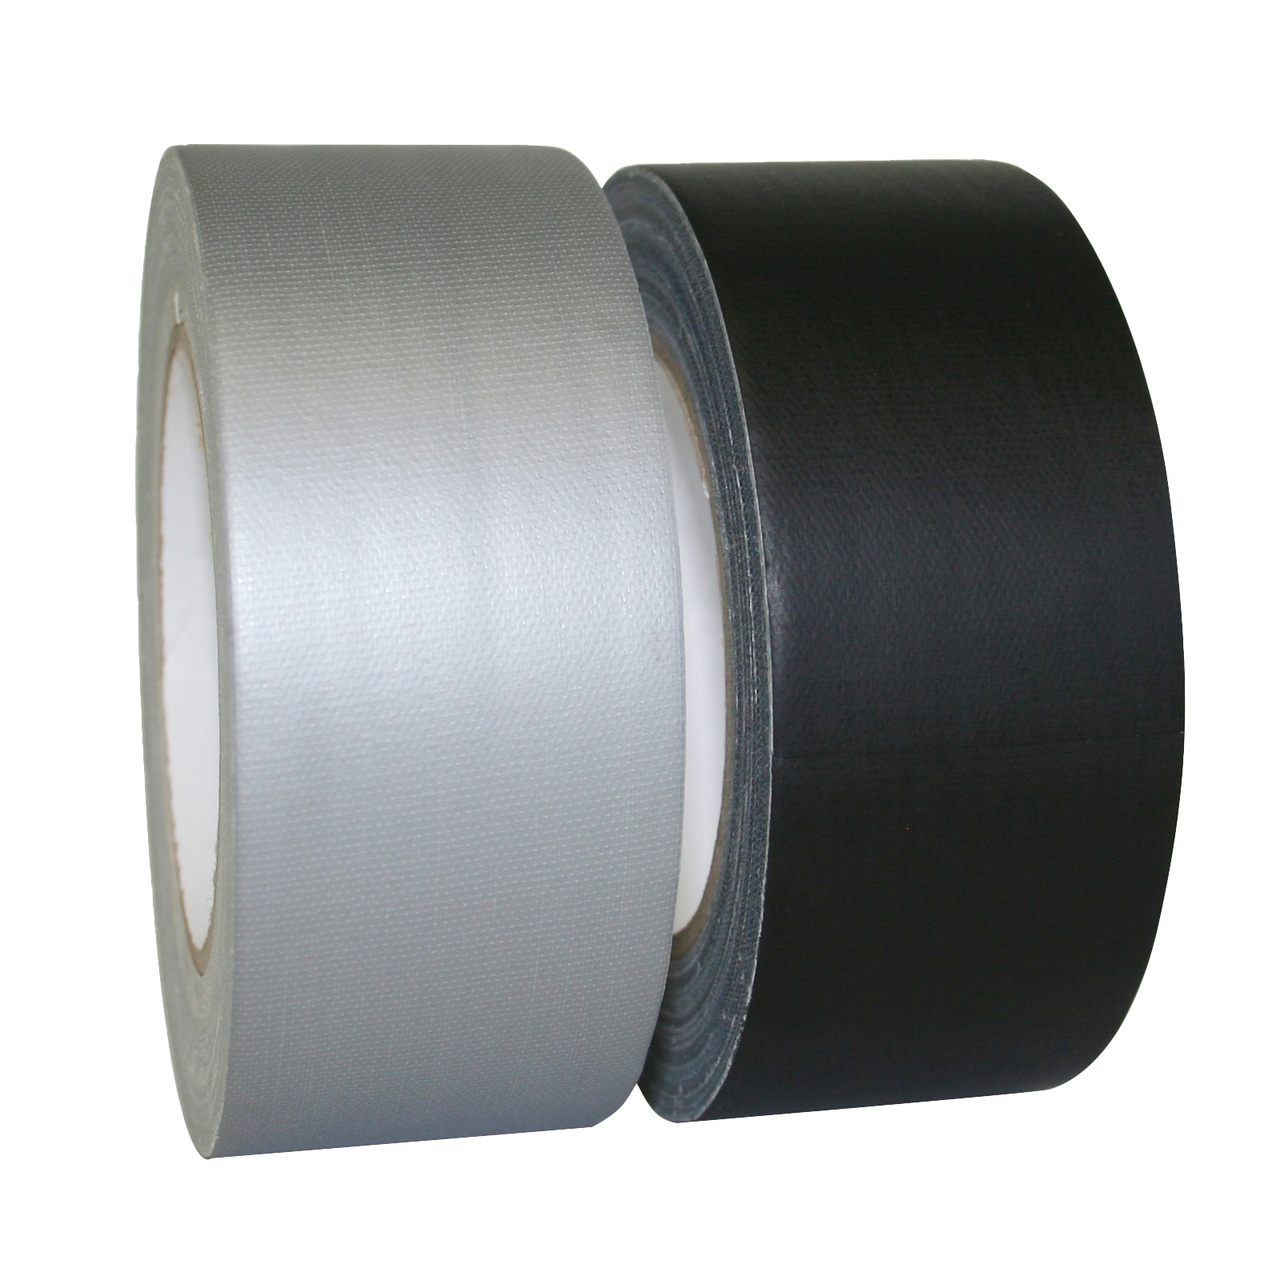 Duct Tape Silver